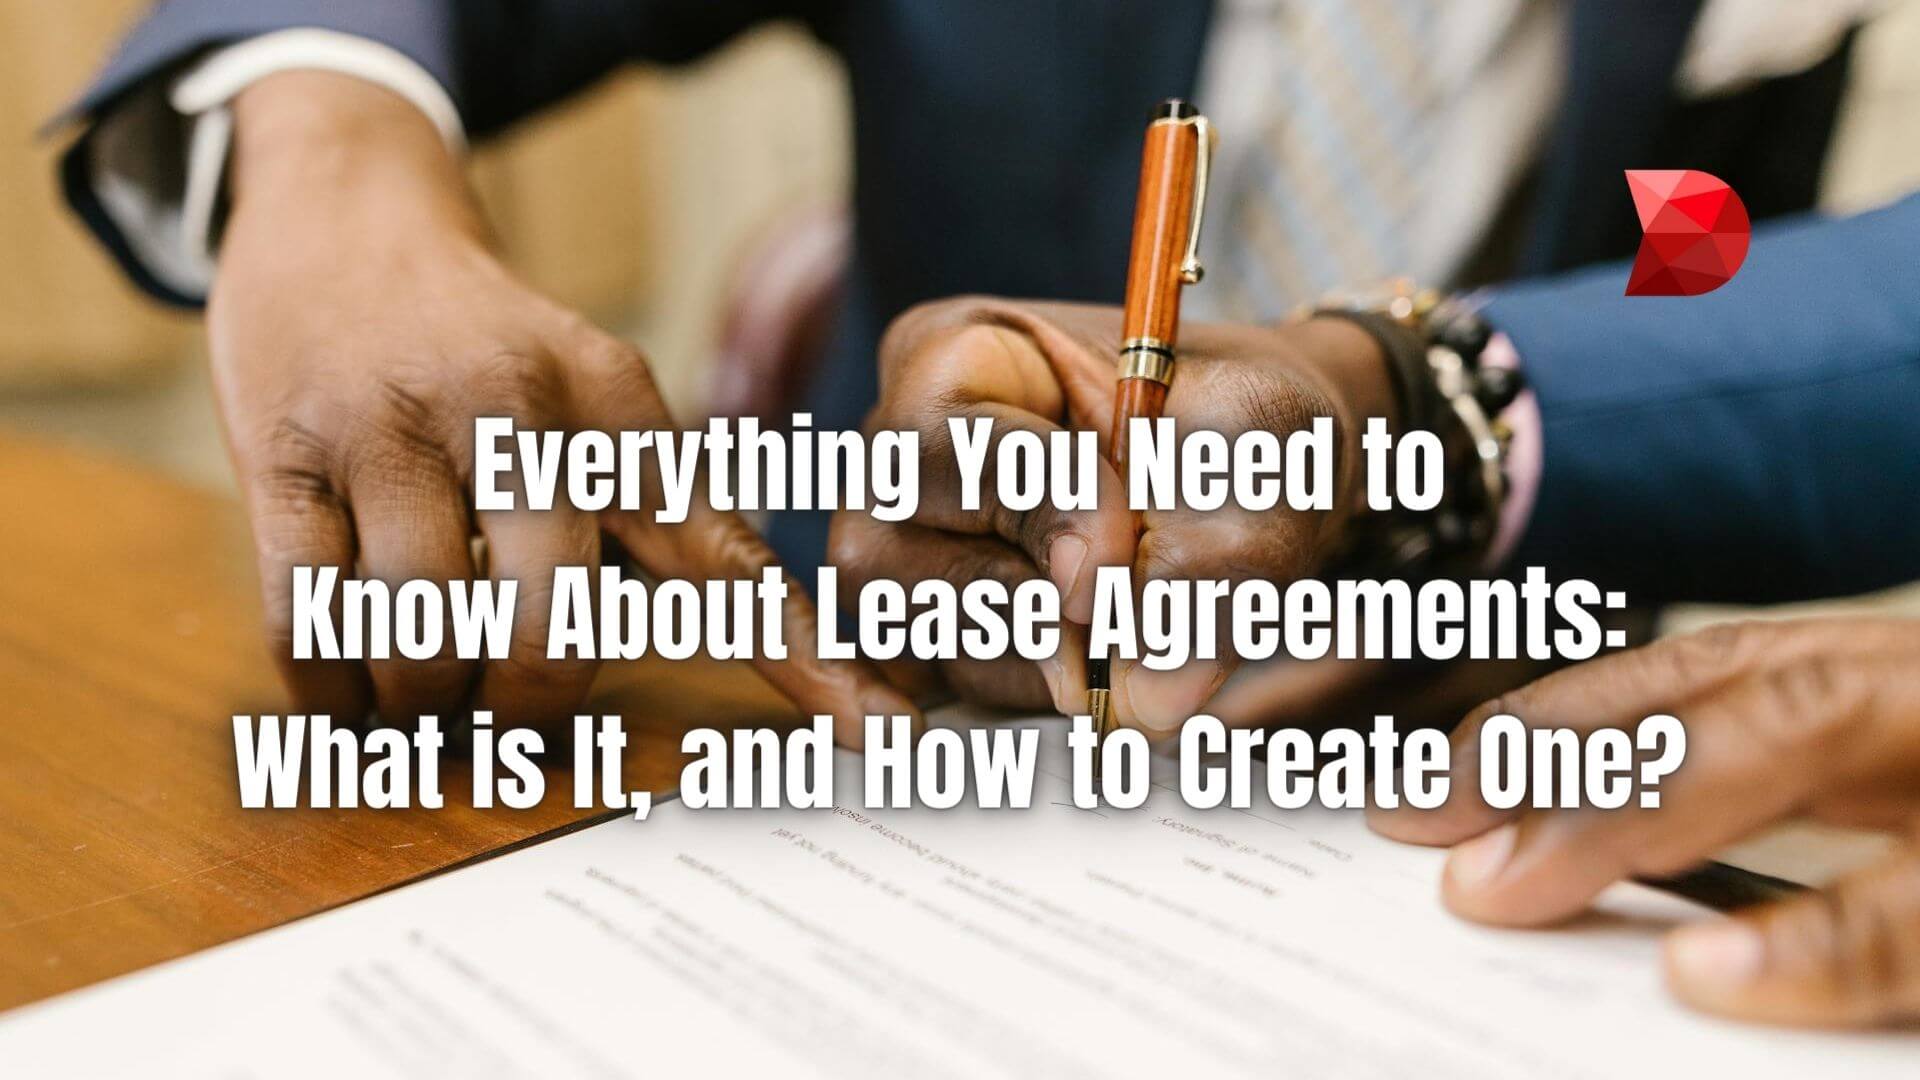 Unlock the secrets of crafting a comprehensive lease agreement with our guide. Learn the ins and outs of creating a solid contract today!